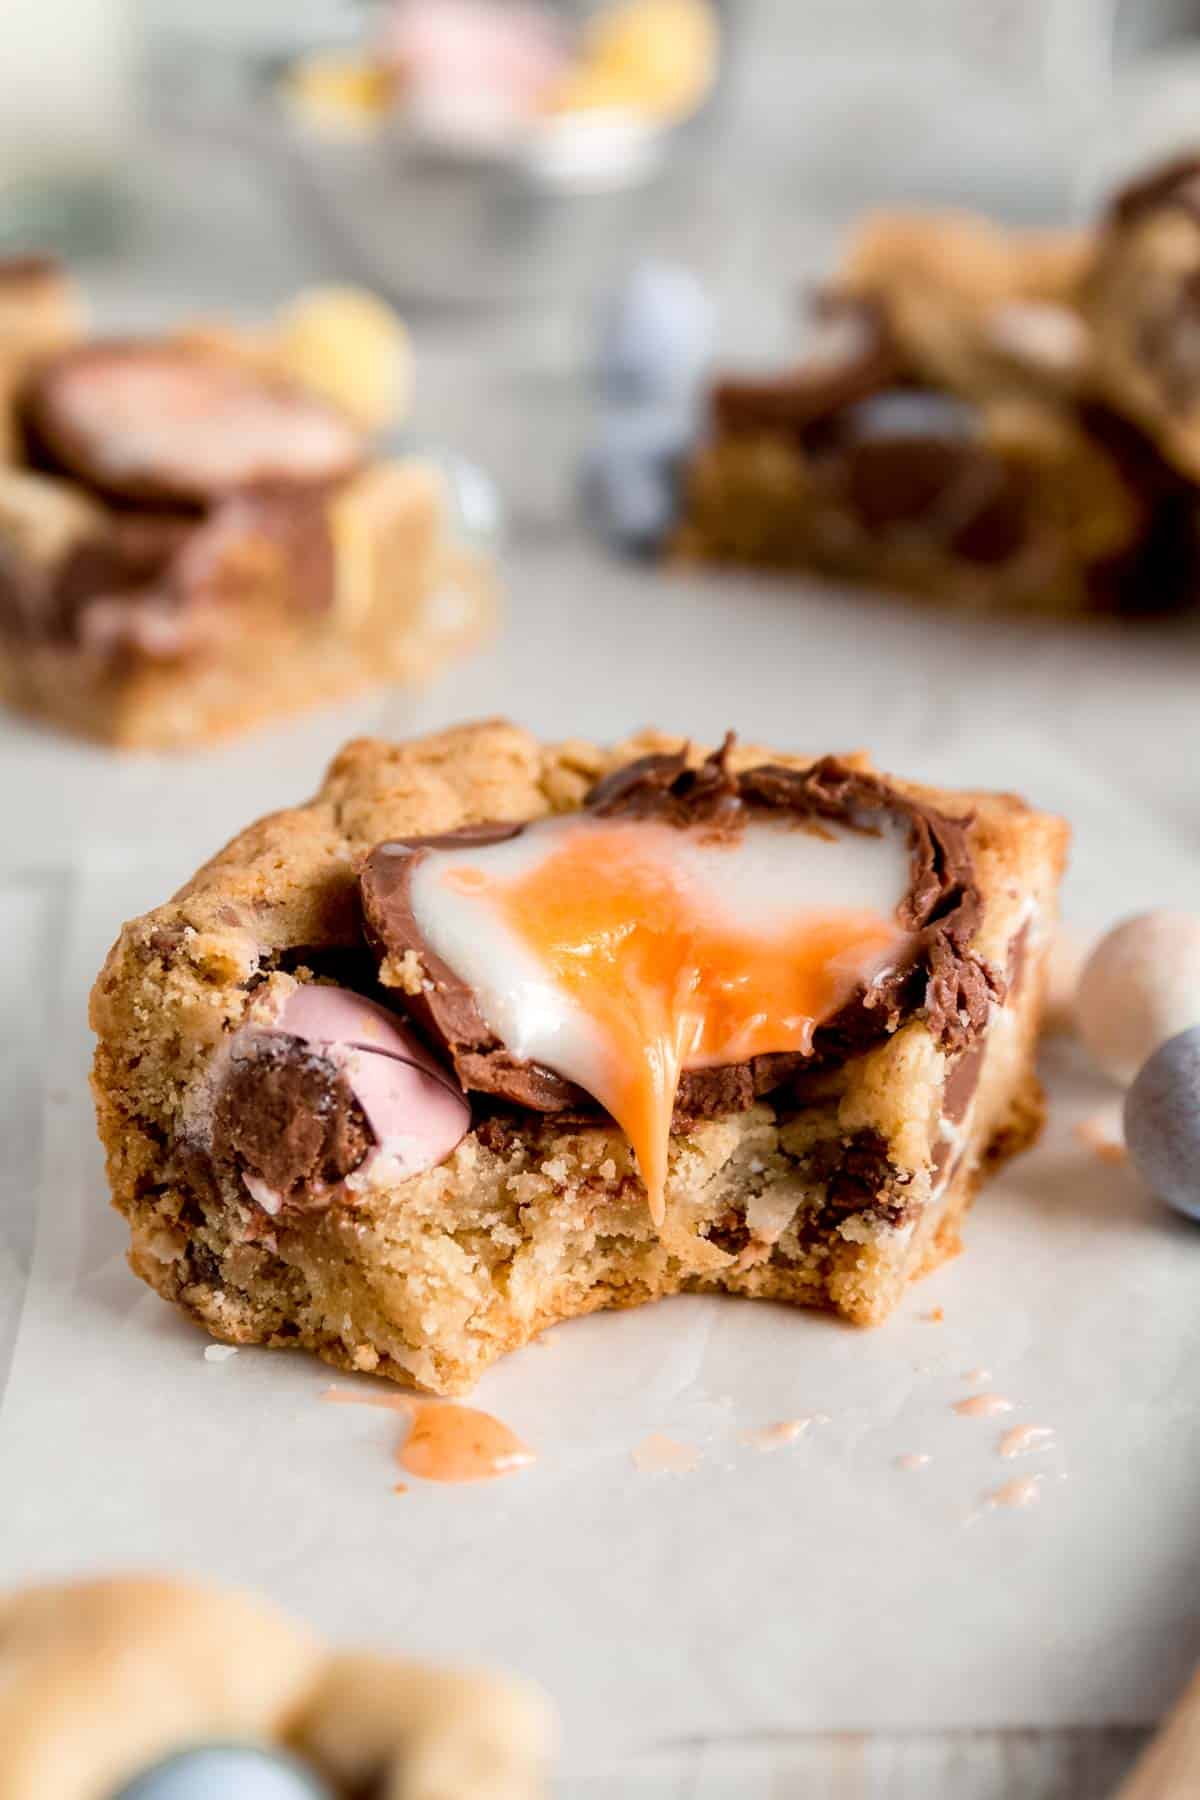 A cookie bar with Cadbury creme egg center dripping down the side.